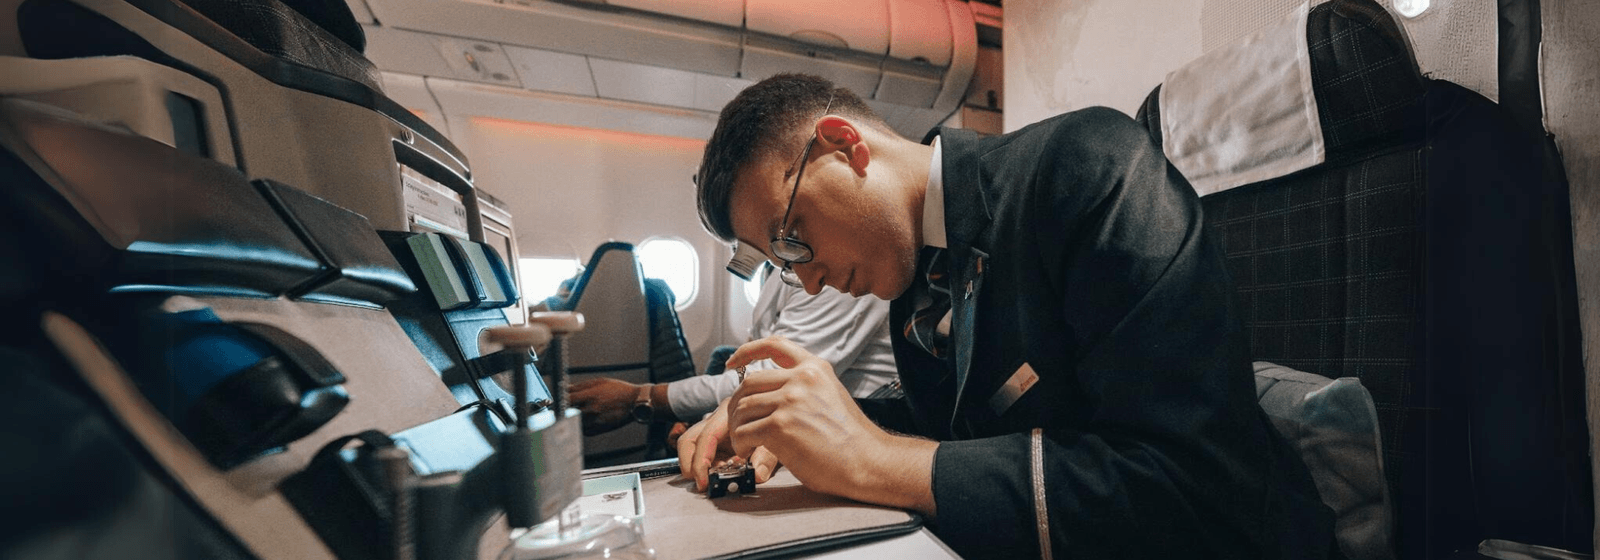 Swiss Watchmaking Takes Flight: Timepiece Assembled At 30,000 Feet